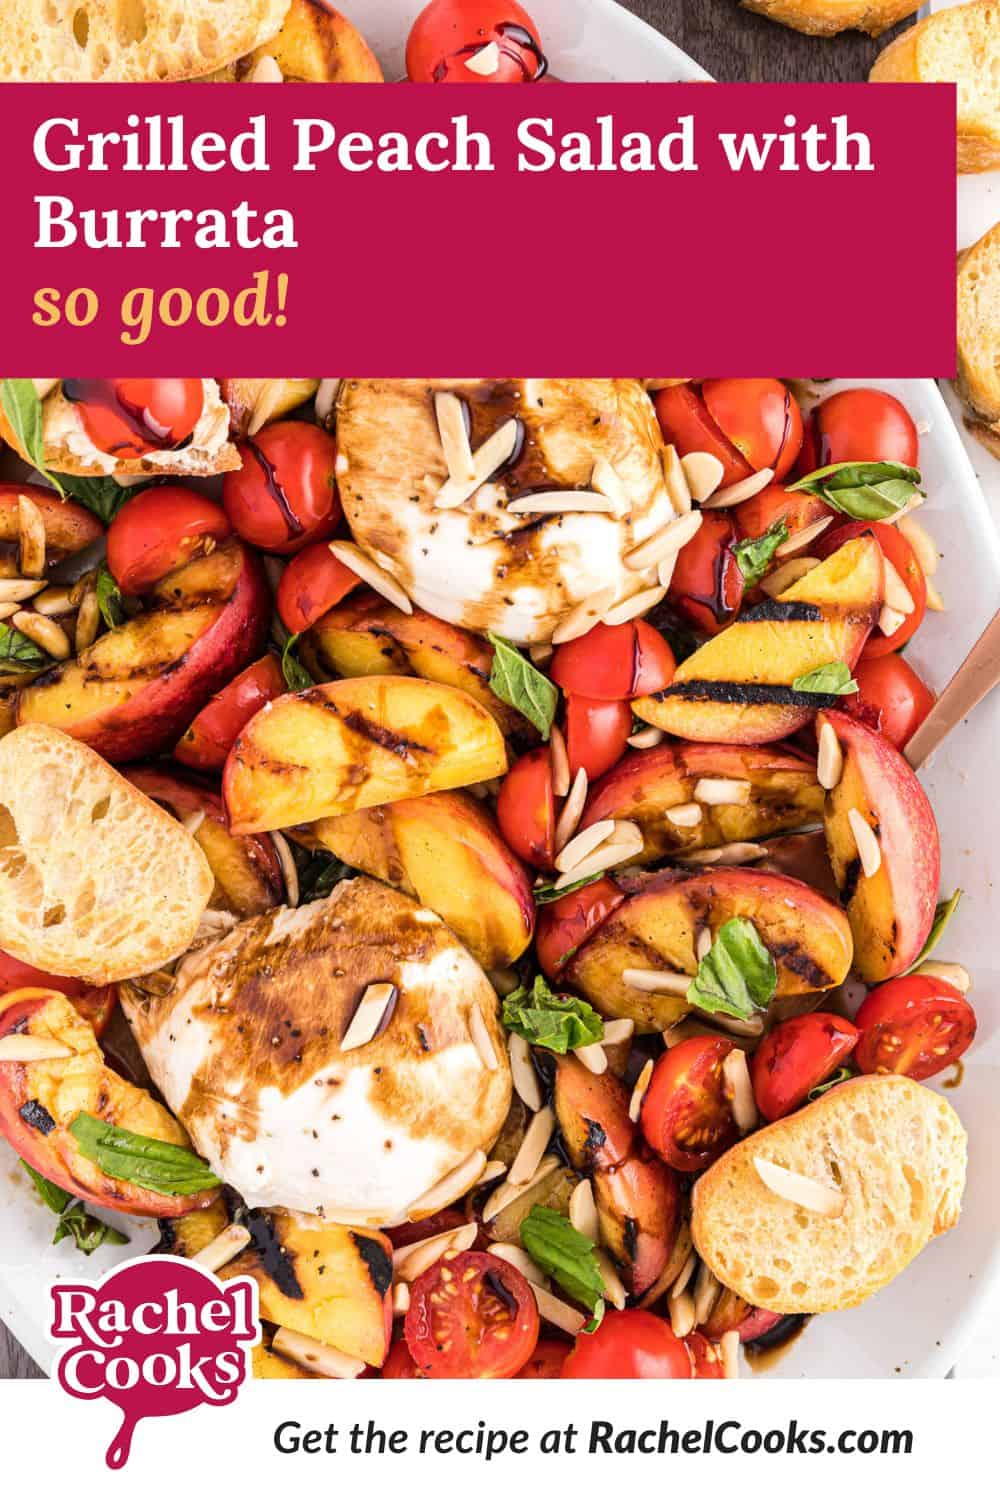 Grilled peach salad pinterest graphic with text and photos.